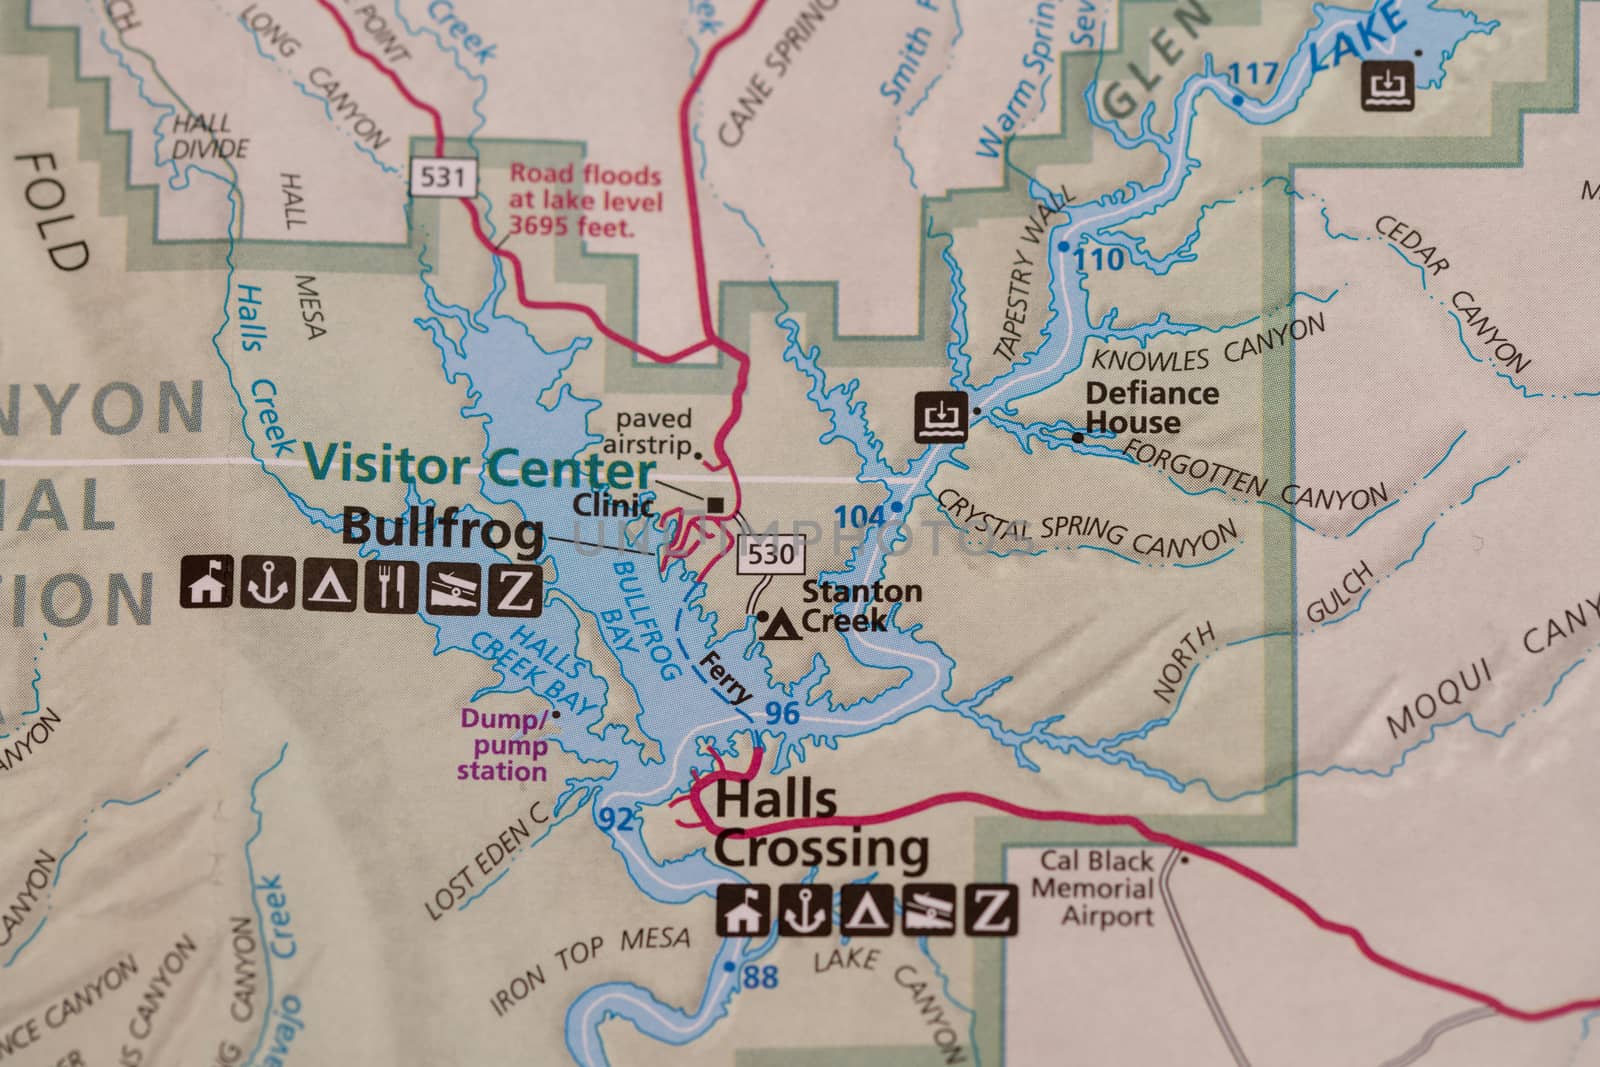 Travel planning accessories, trip to USA, Lake Powell area, map detail of Lake Powell, AZ